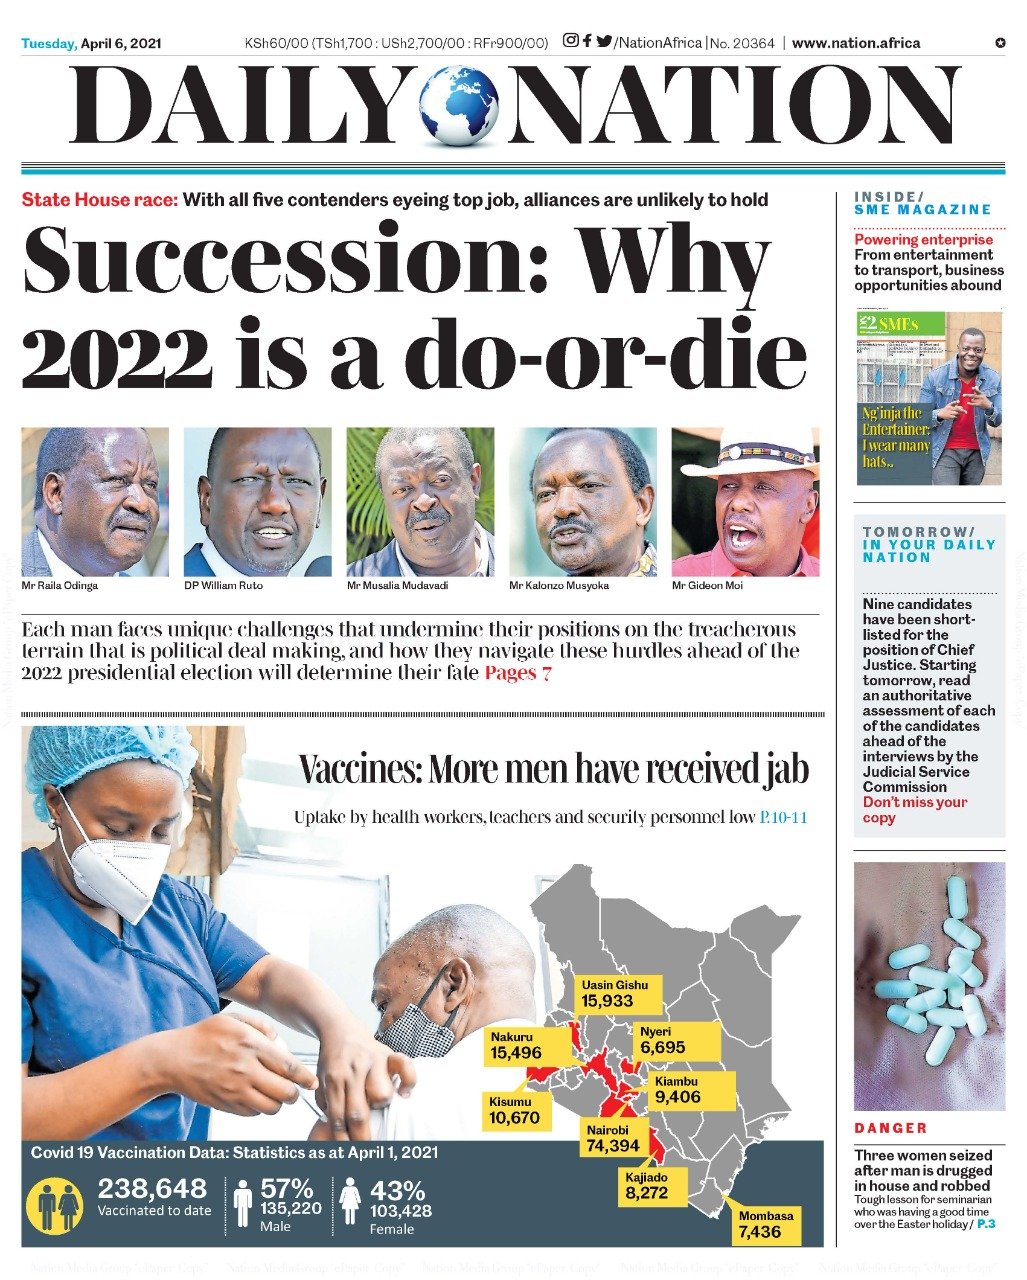 Daily Nation's front page on 6 April 2021